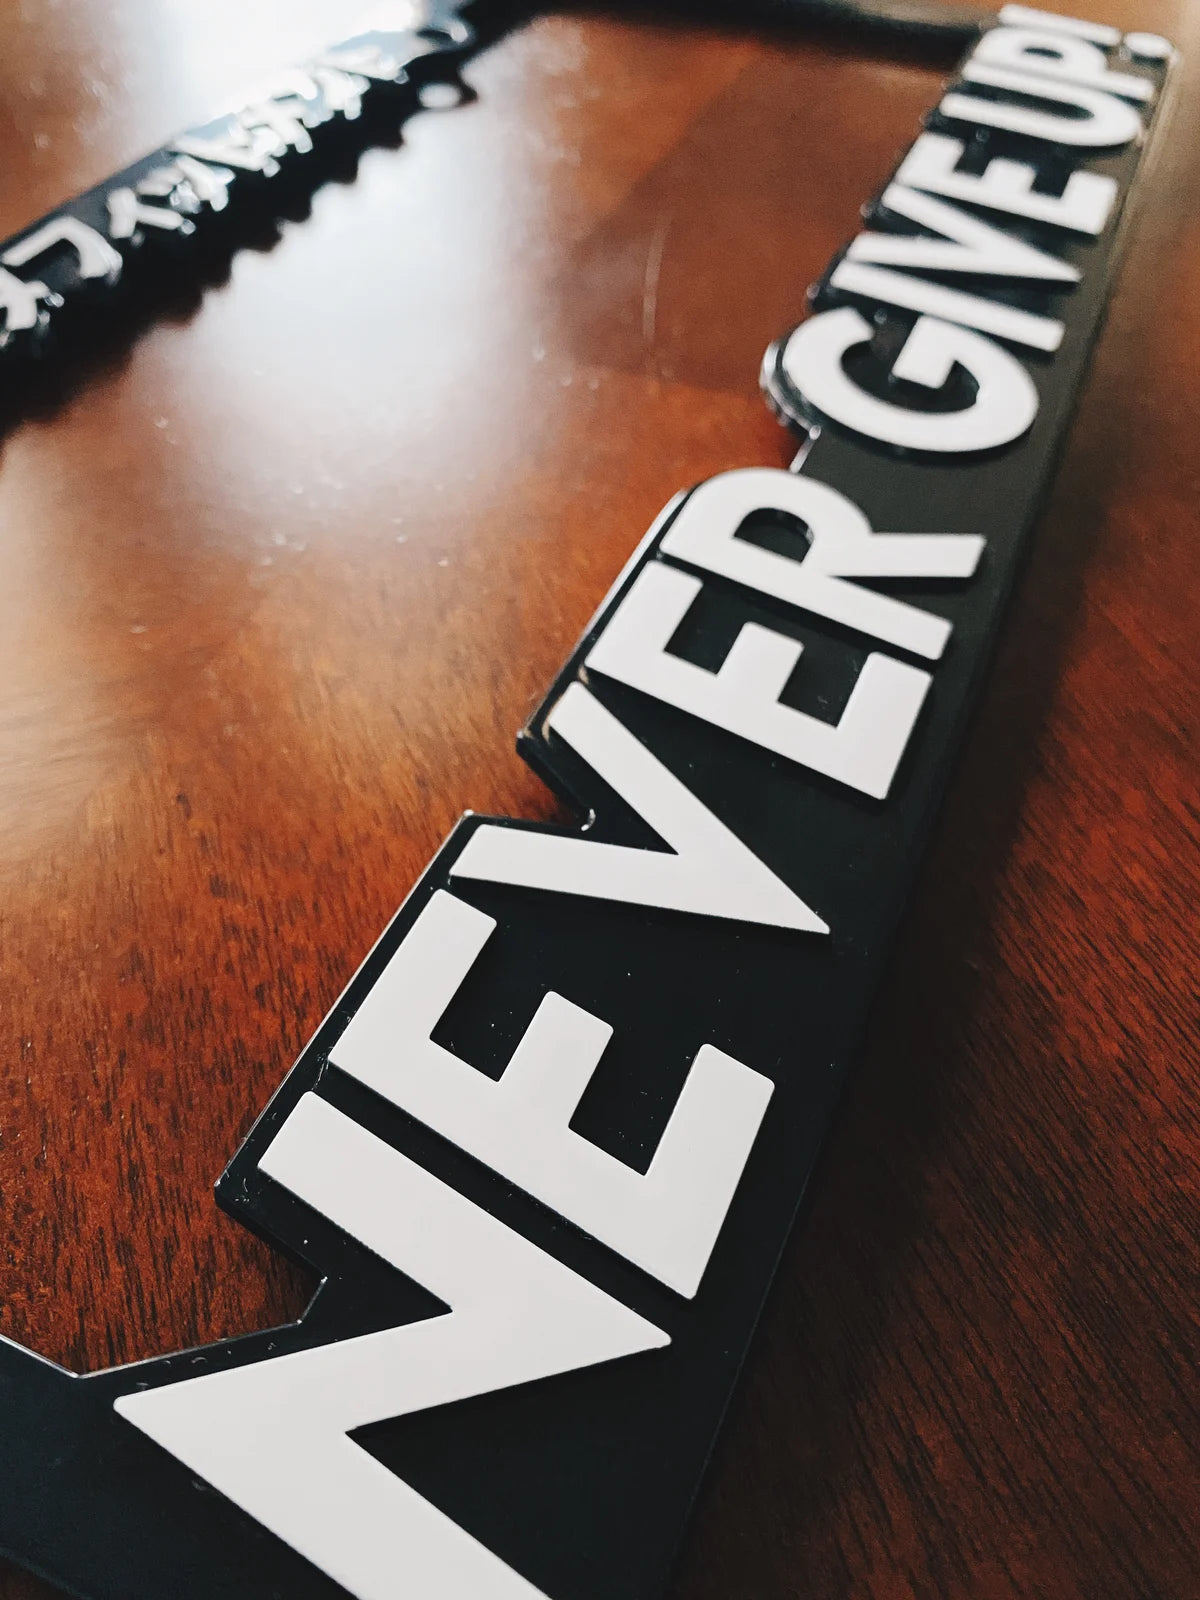 NEVER GIVE UP! - LICENSE PLATE FRAME